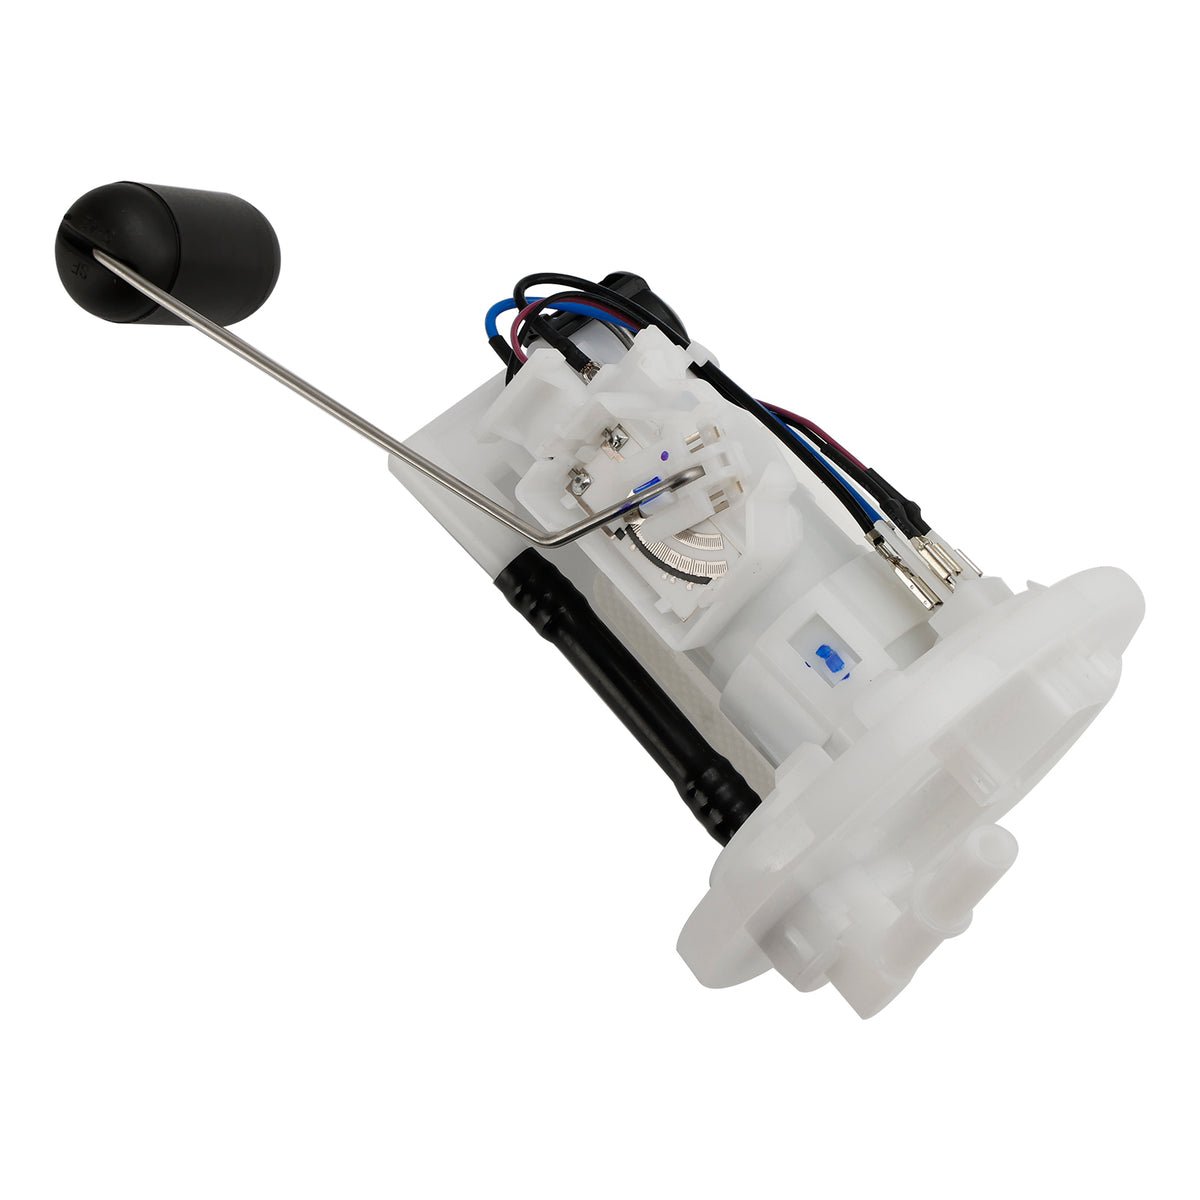 1Wd-E3907-00 1Wd-E3907-11 Fuel Pump Assembly For Yamaha Mt-25 Mt-03 Yzf R25 R3